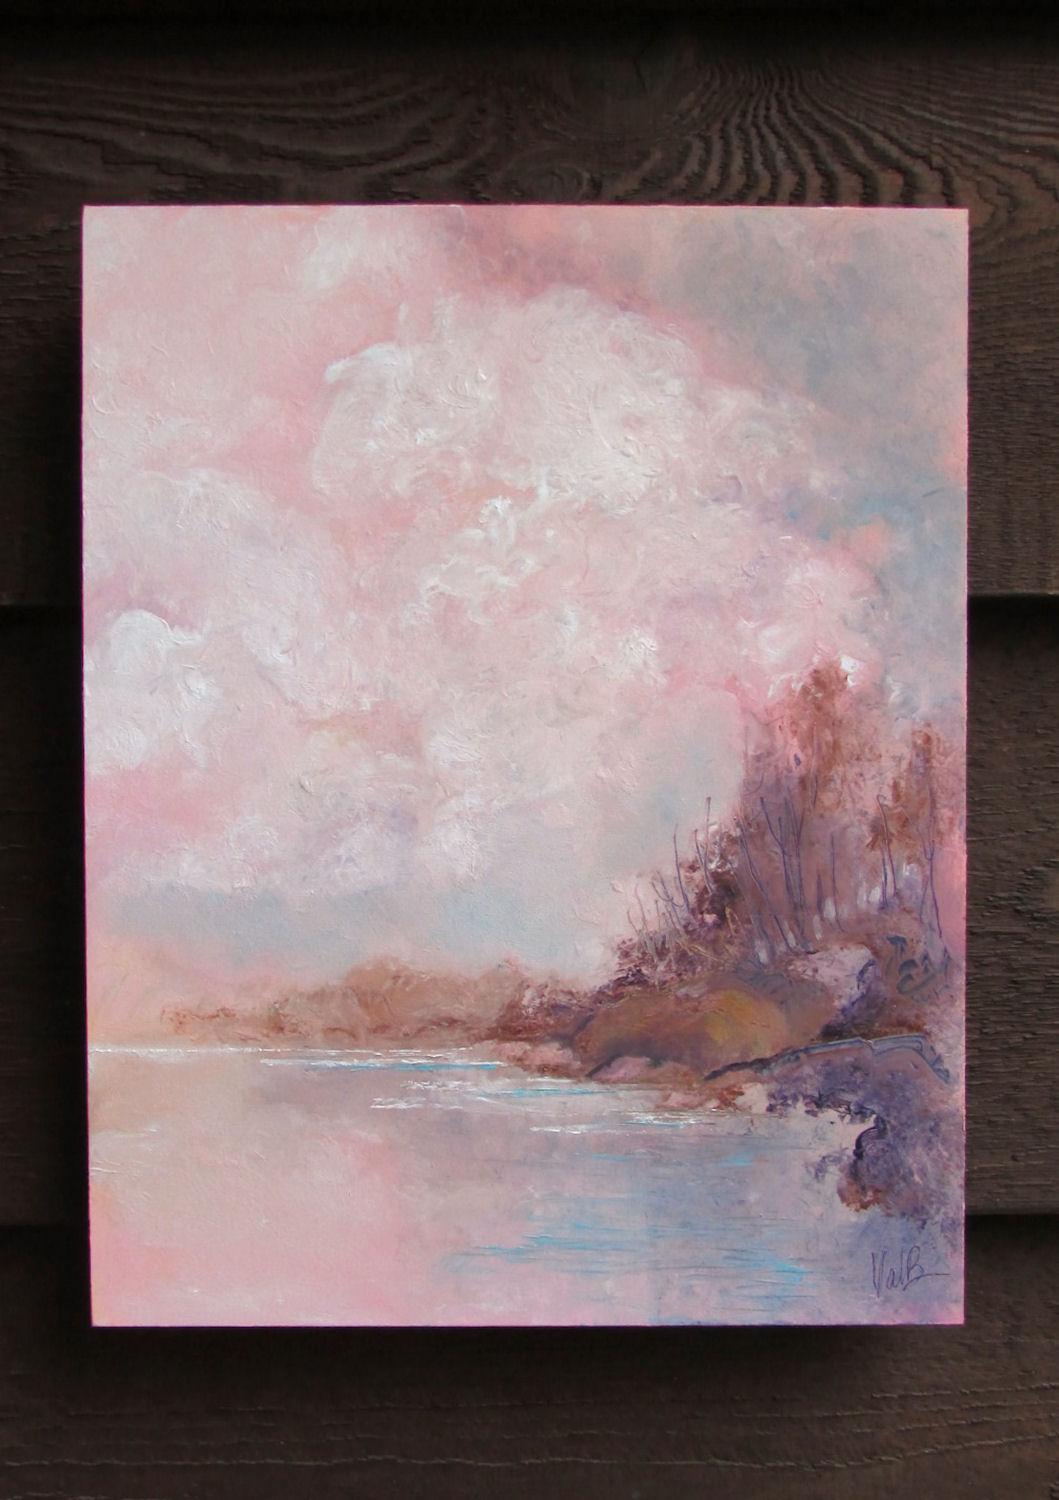 <p>Artist Comments<br>Artist Valerie Berkeley presents a tranquil coastal scene where delicate hues of pink and lavender paint the sky. Traces of Valerie's fingertips grace the composition, forming subtle textures from the sturdy rocks below to the